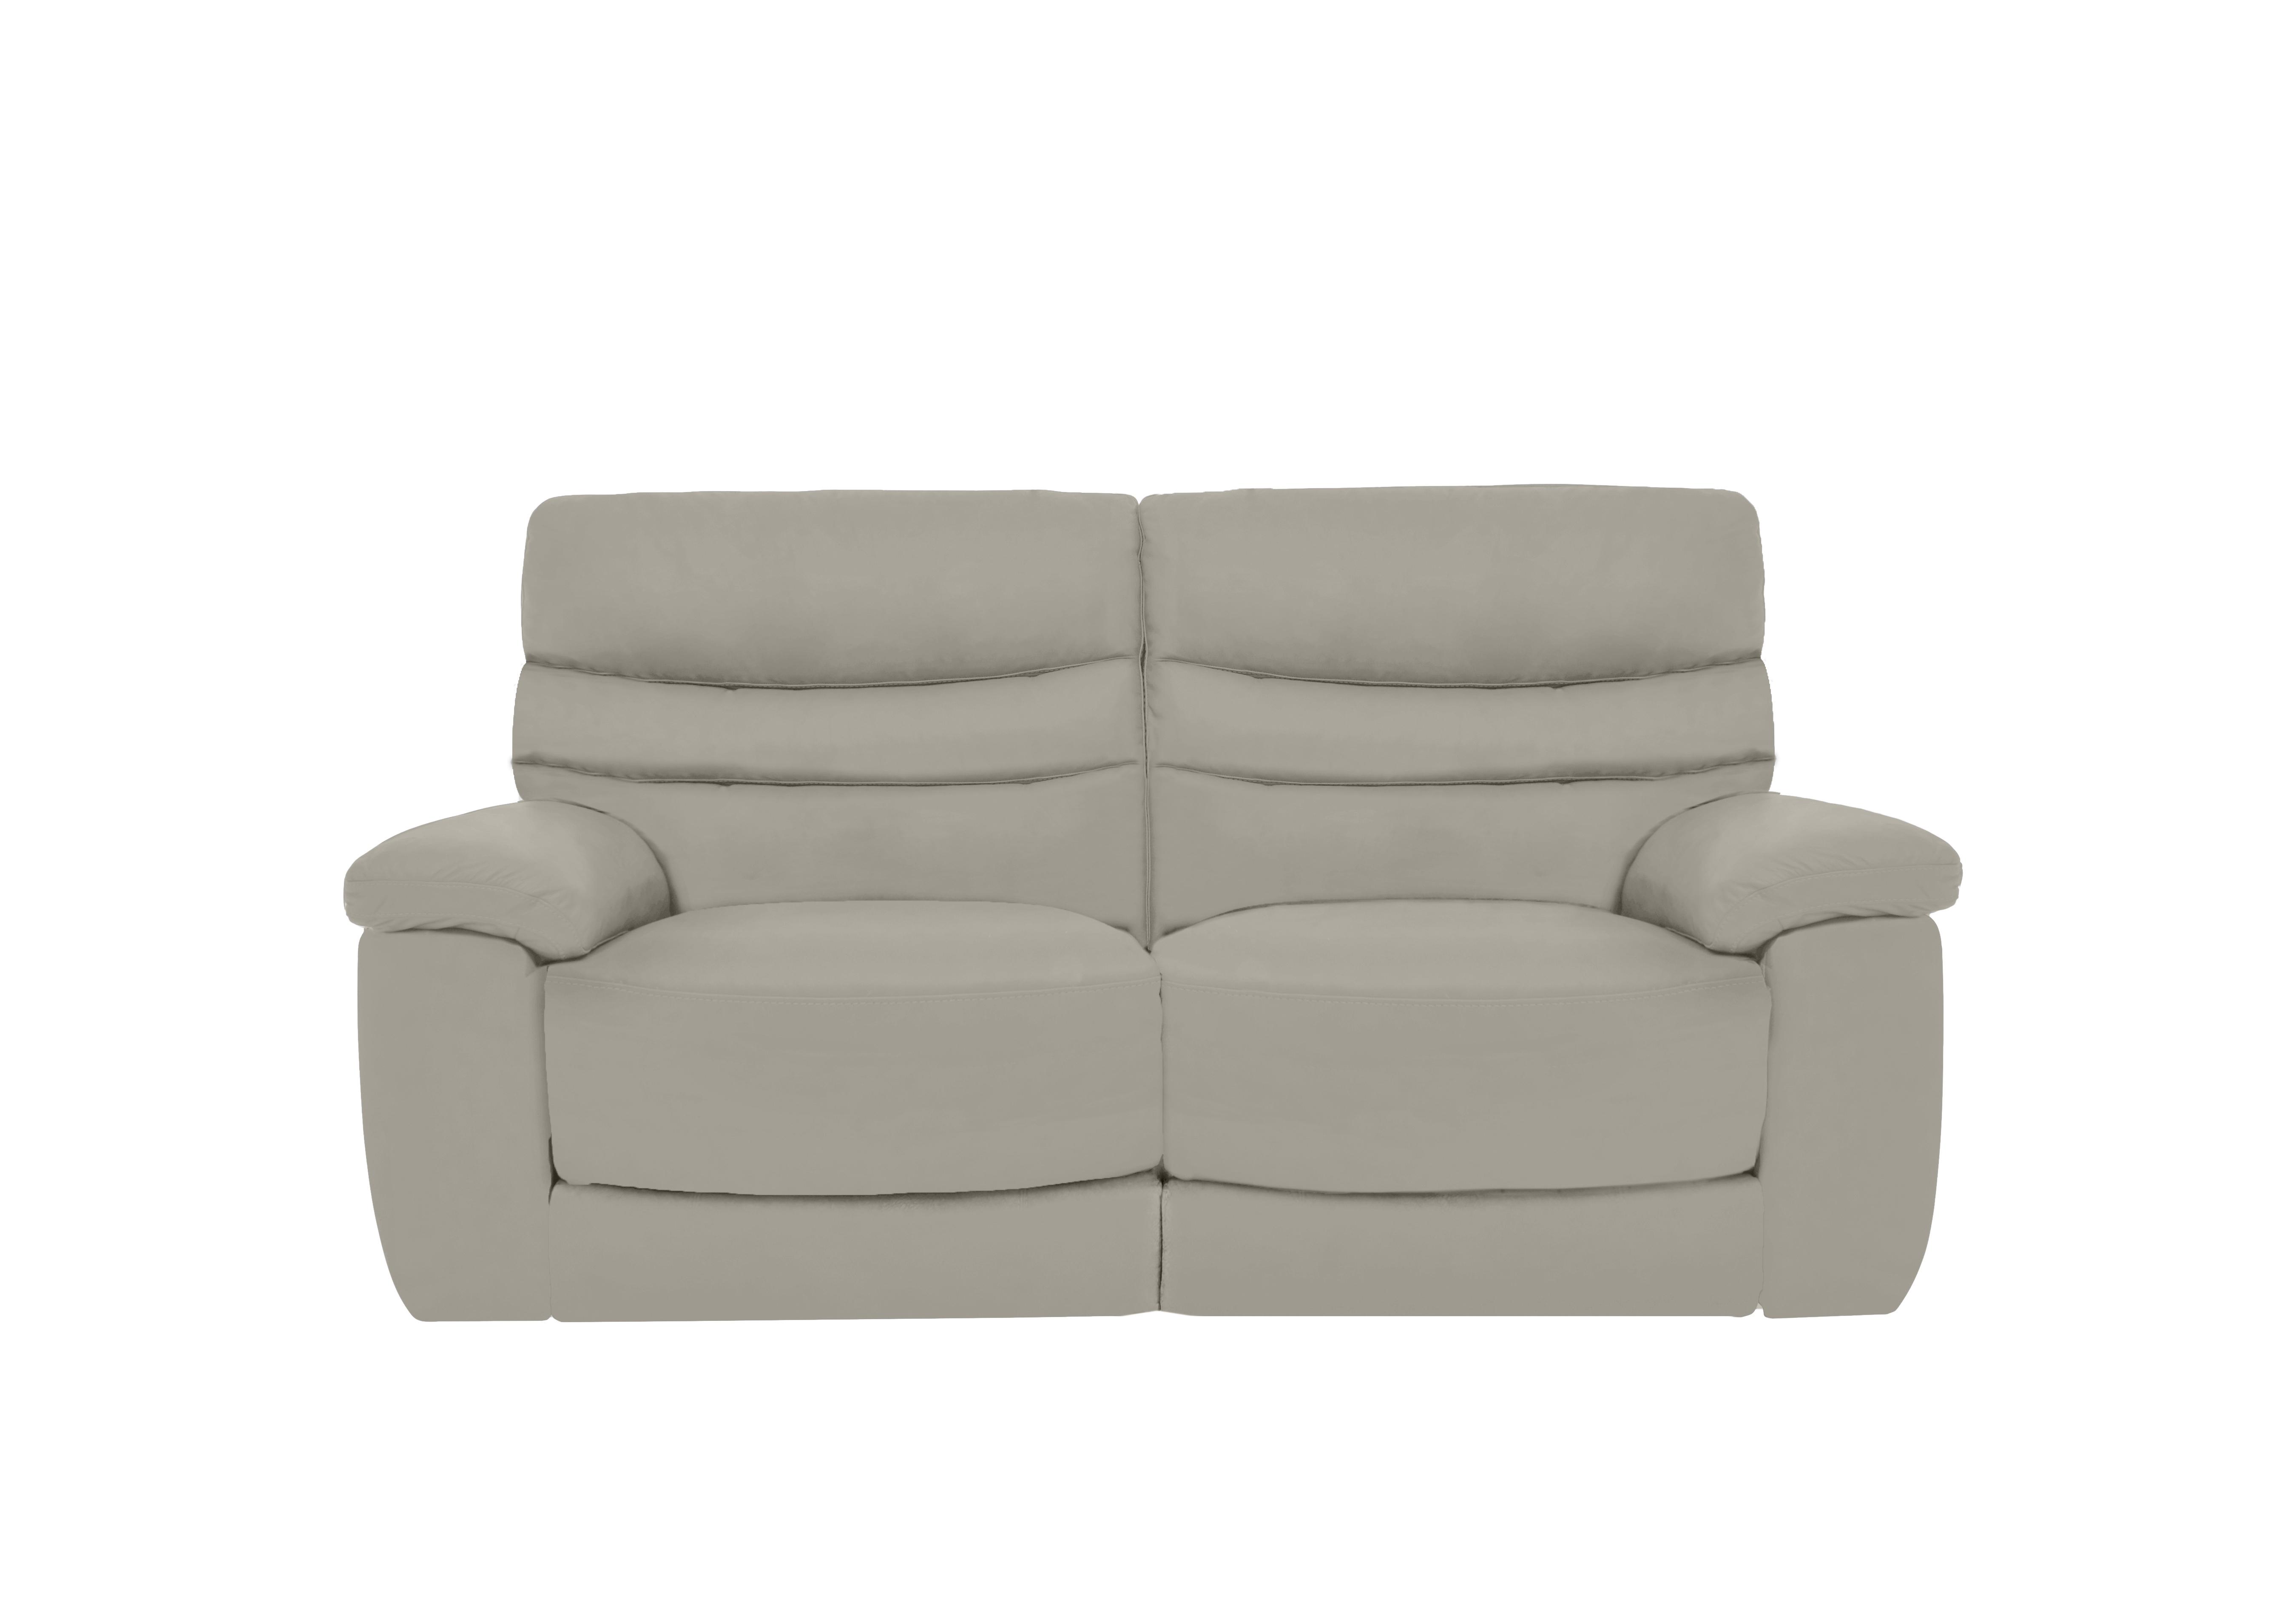 Nimbus 2 Seater Leather Power Recliner Sofa with Power Headrests and Power Lumbar in Bx-251e Grey on Furniture Village